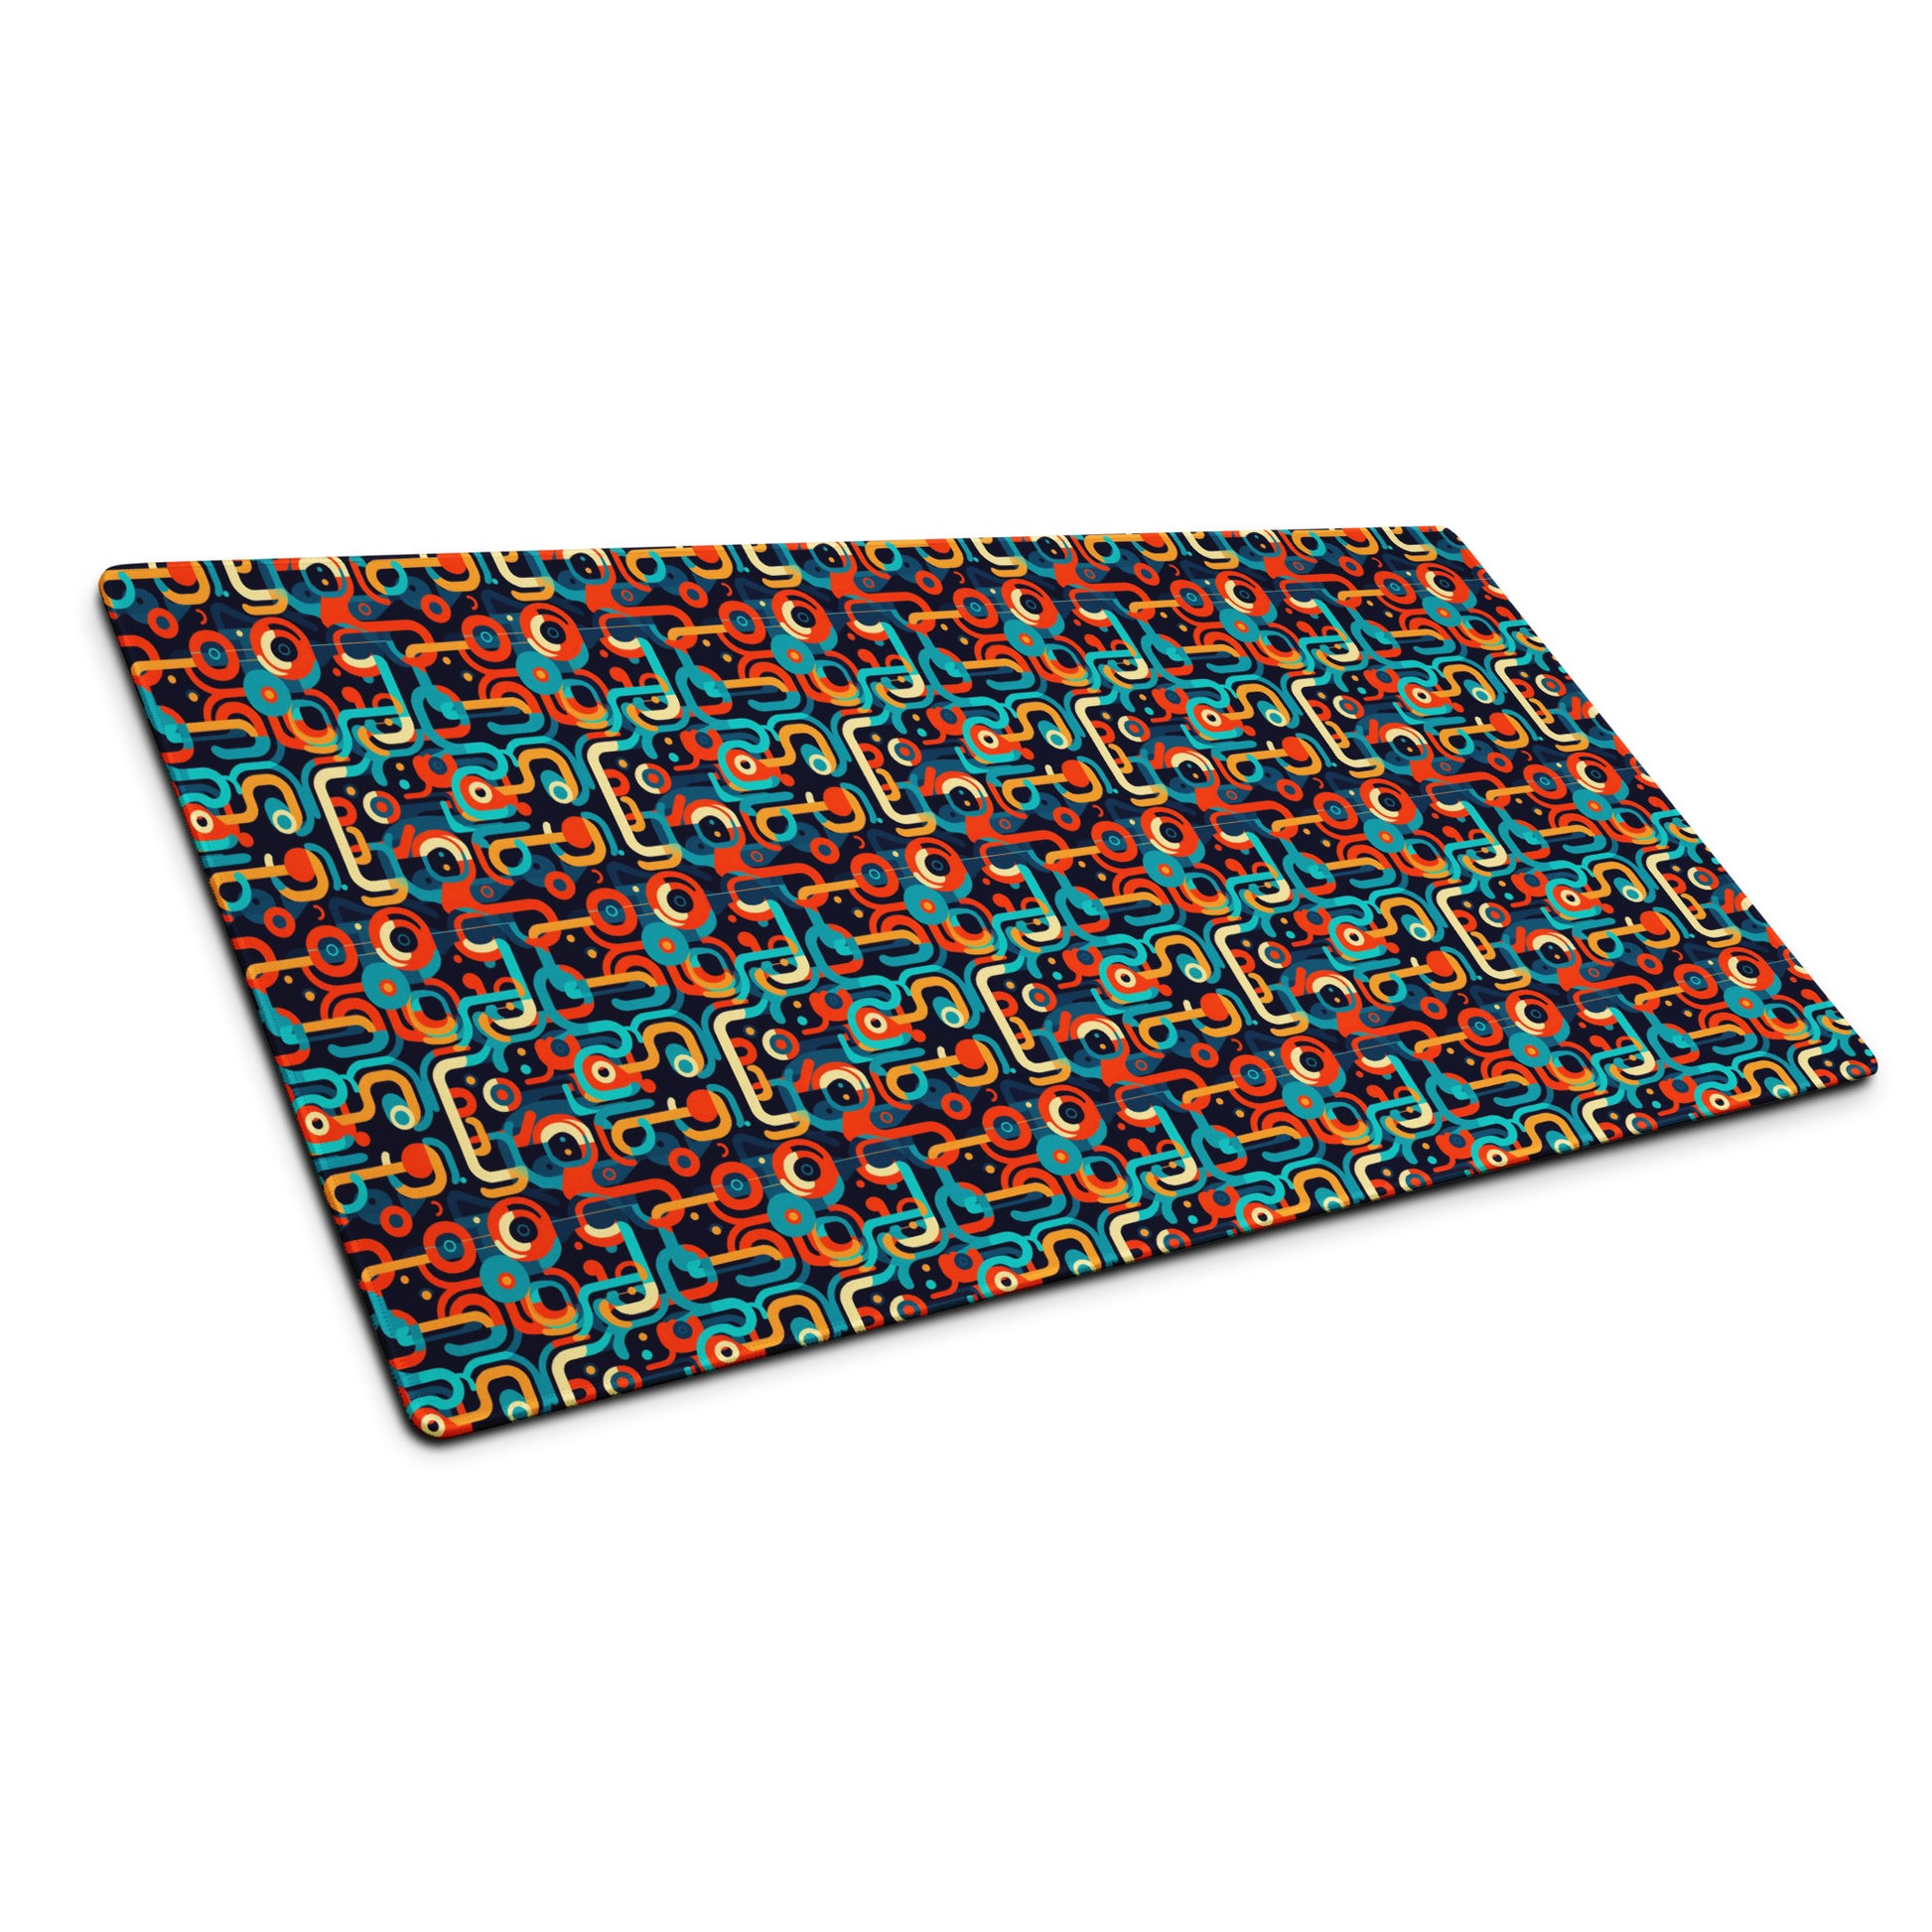 A 36" x 18" gaming desk pad with blue, orange, and beige lines on a black background sitting at an angle.